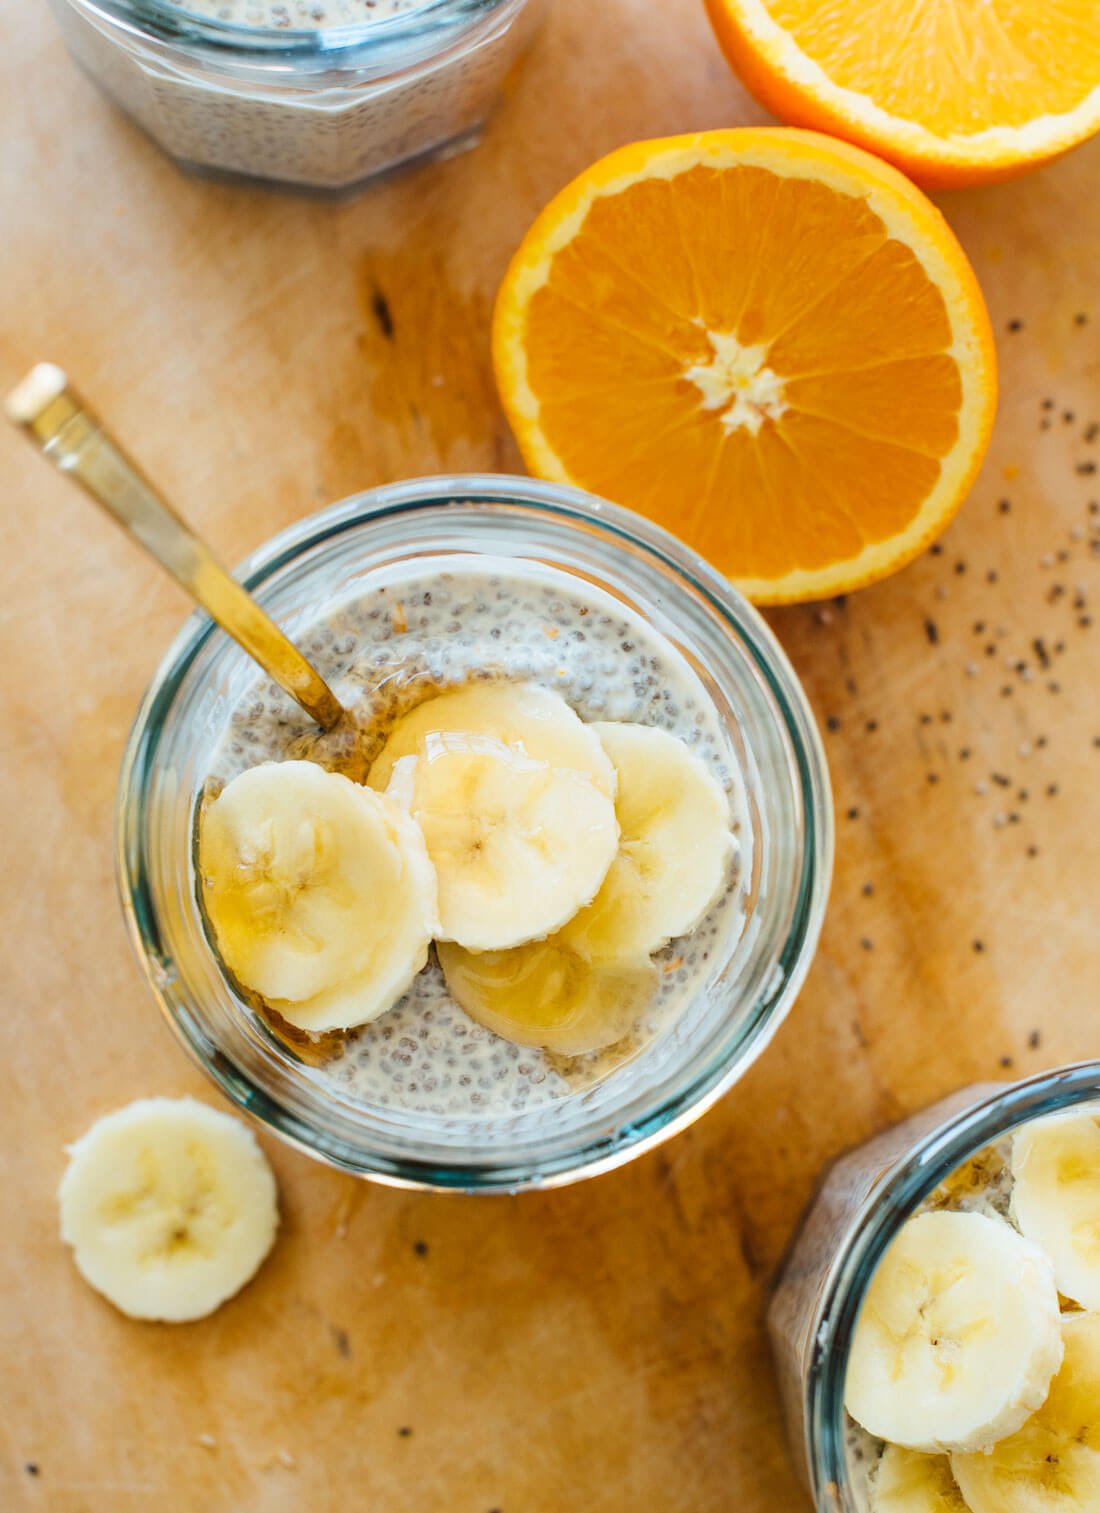 This chia seed pudding recipe tastes like a creamsicle! So healthy and delicious.